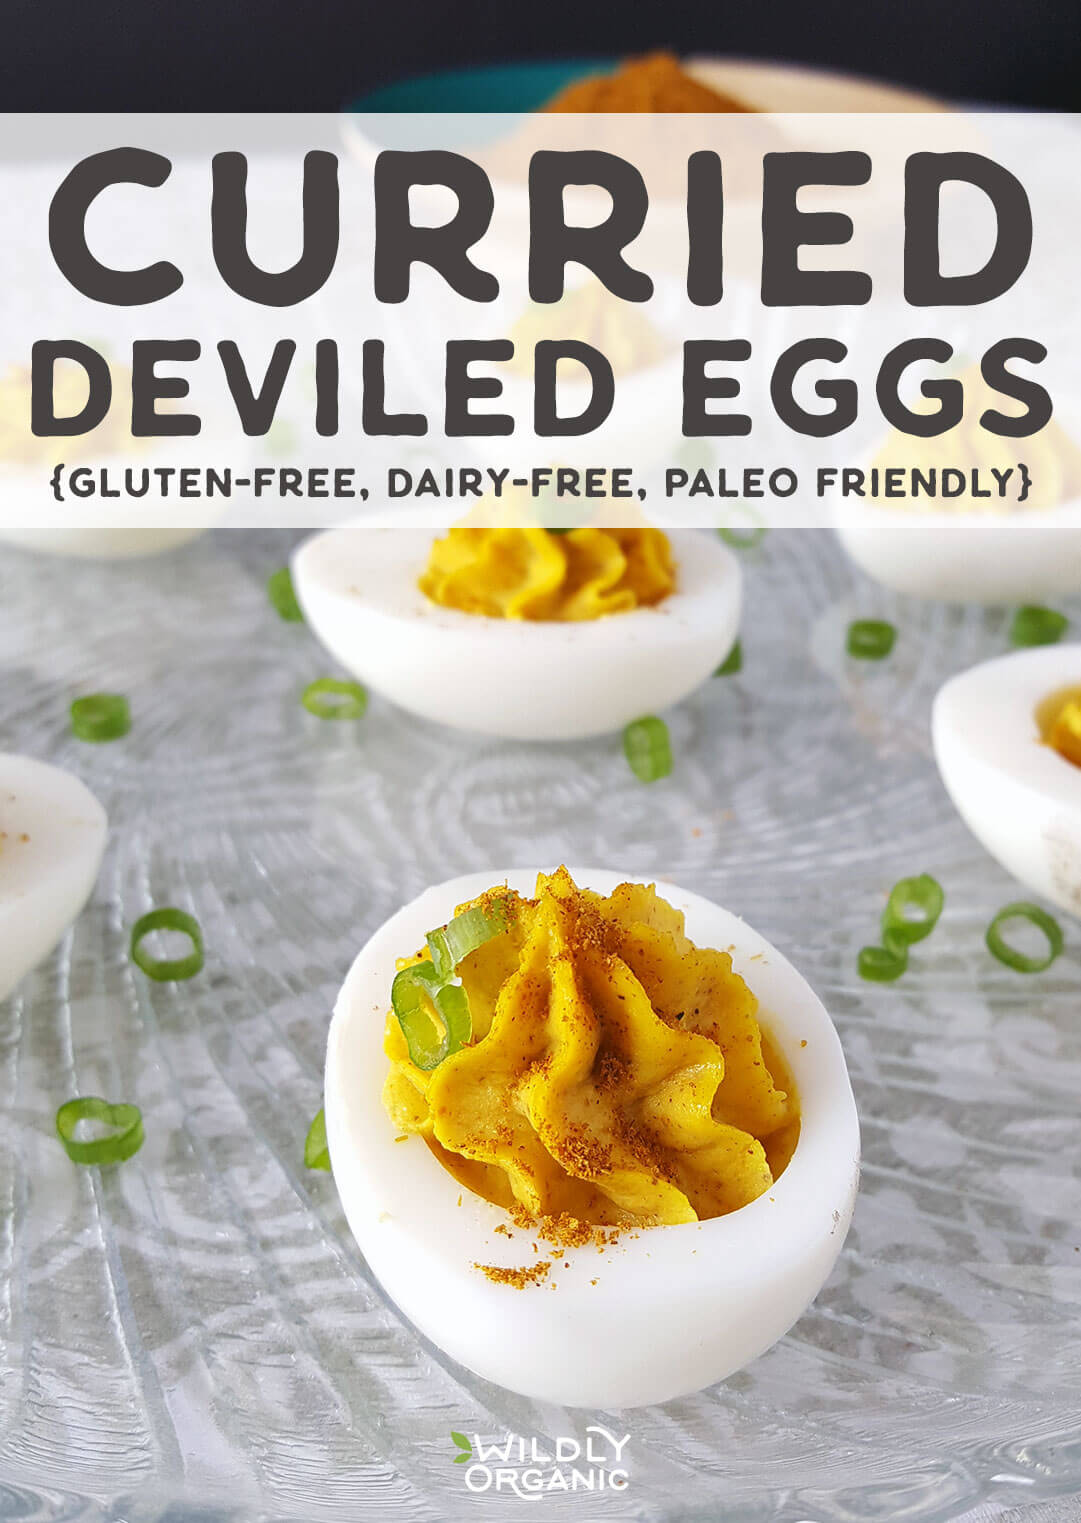 Photo of Curried Deviled Eggs on a plate.